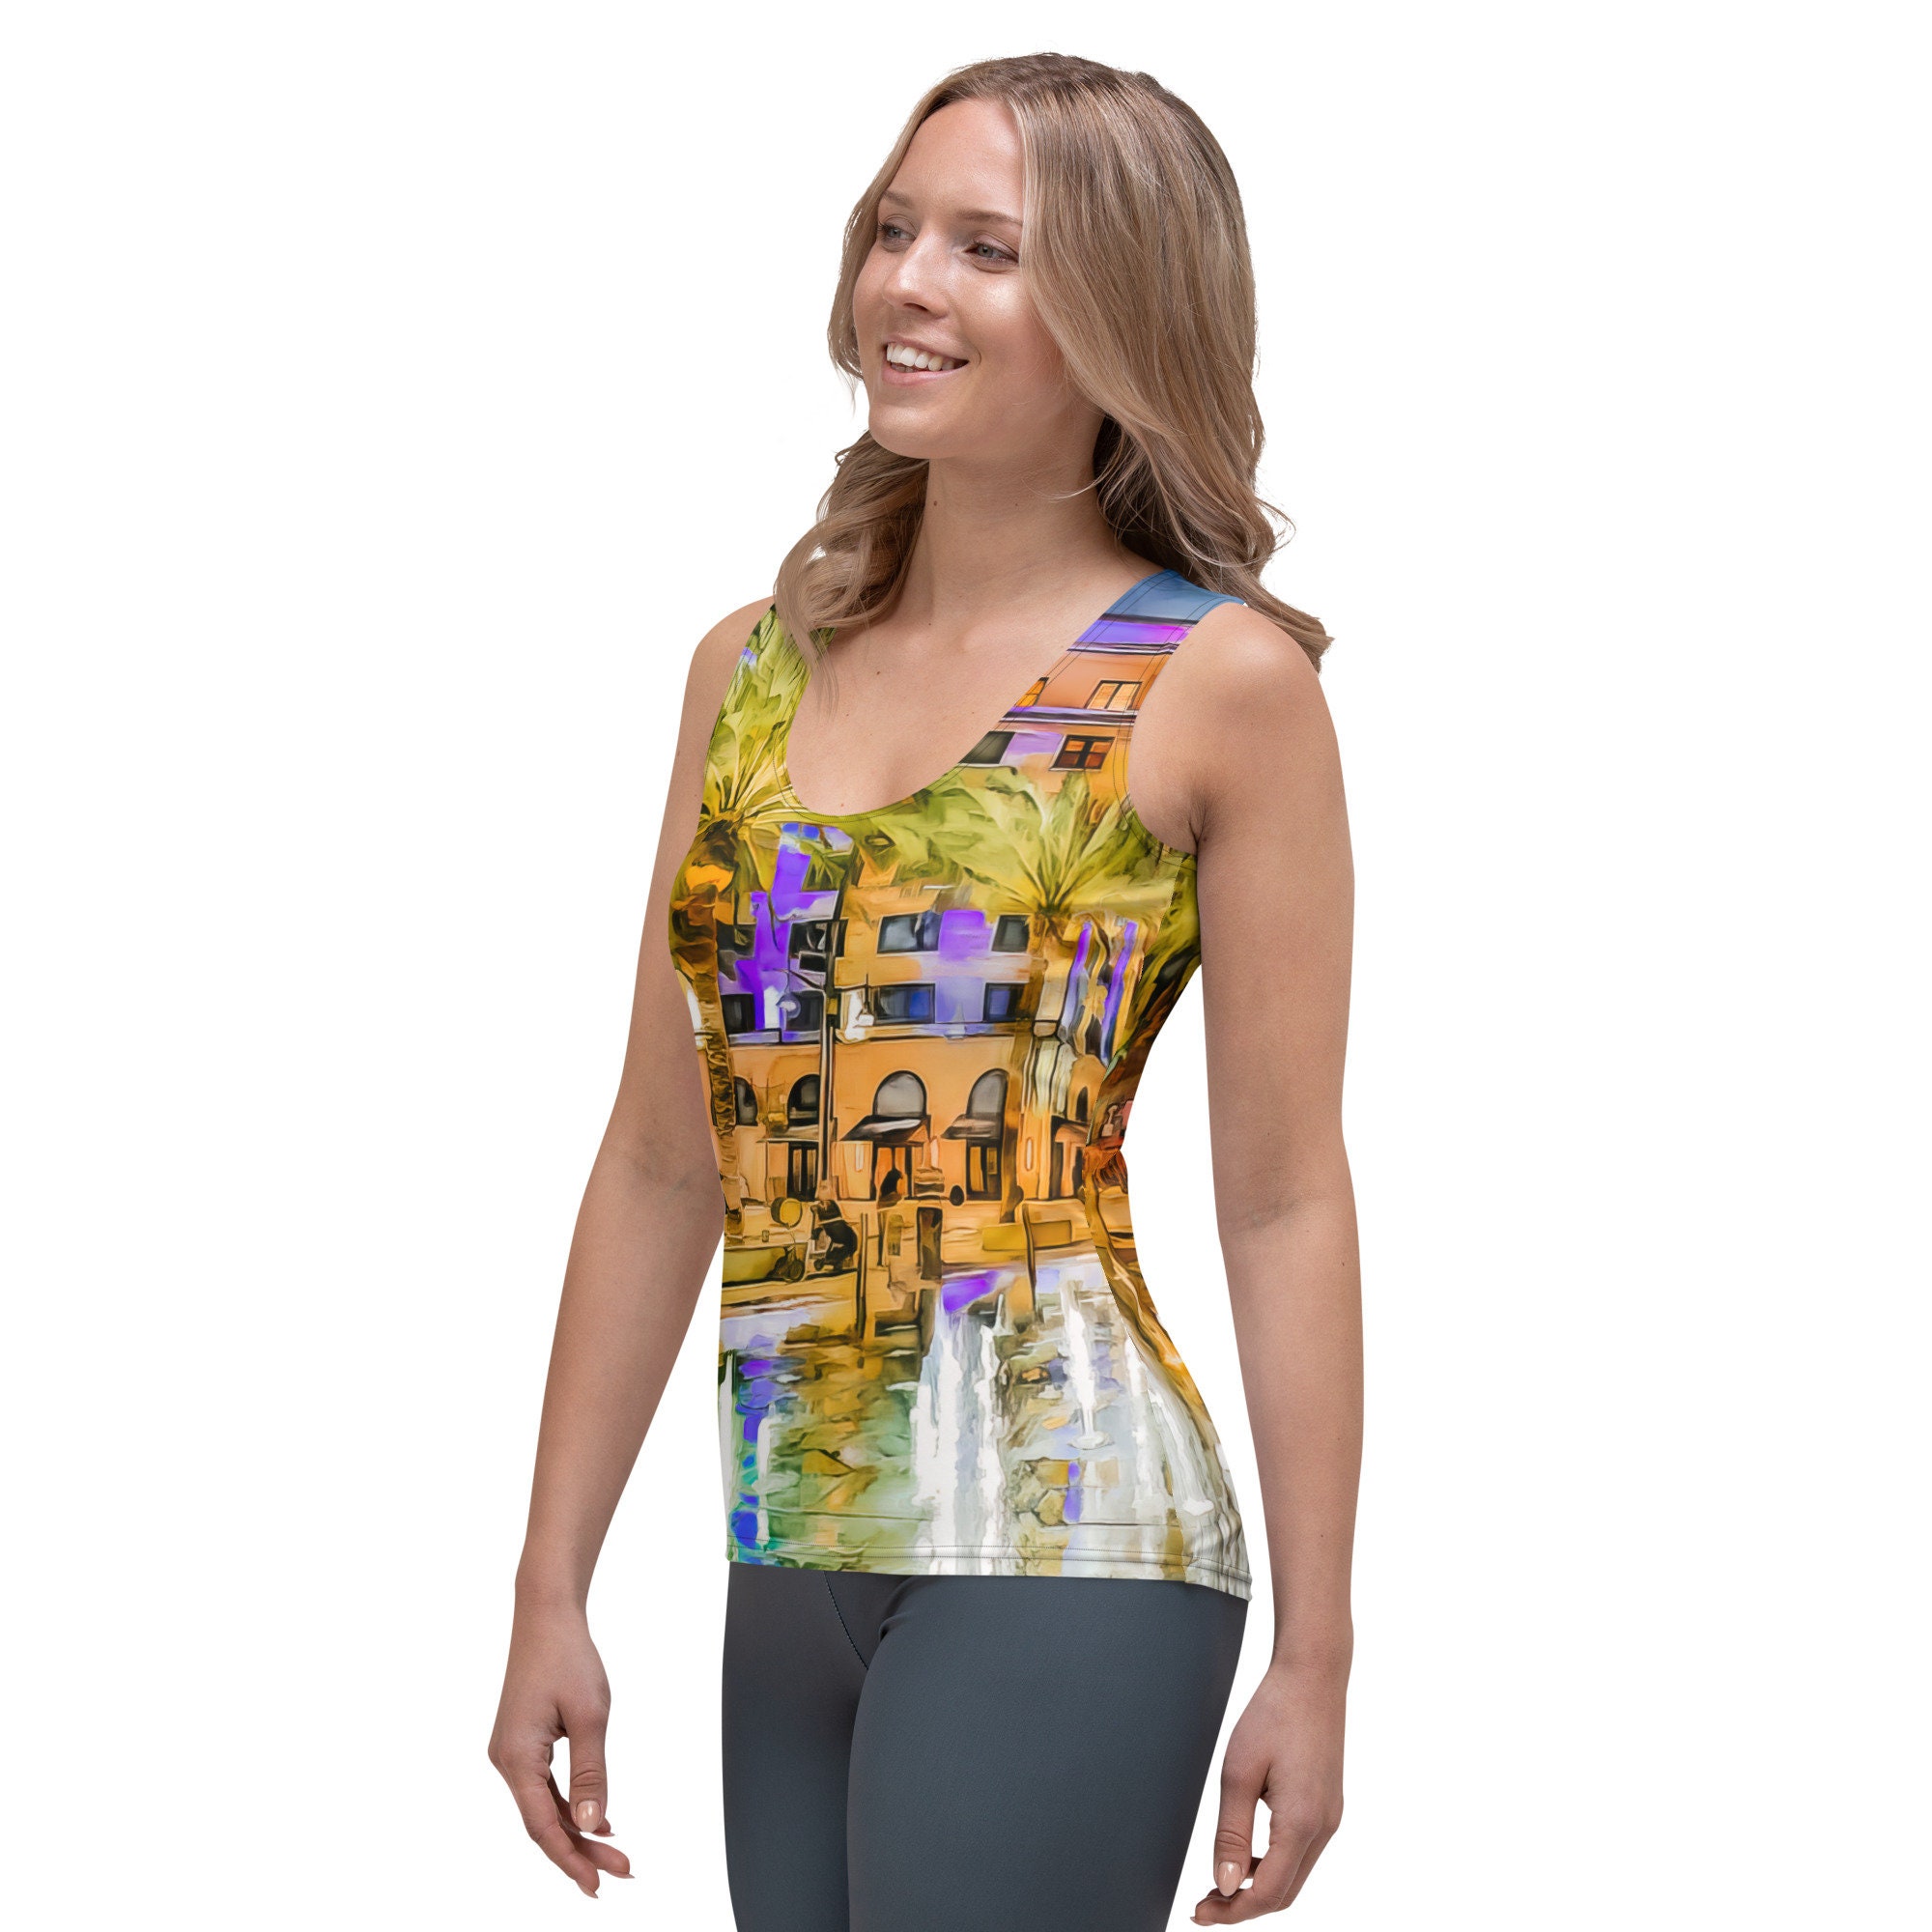 Clematis Street Tank Top Tank Top for Women Gift for Her Gift for